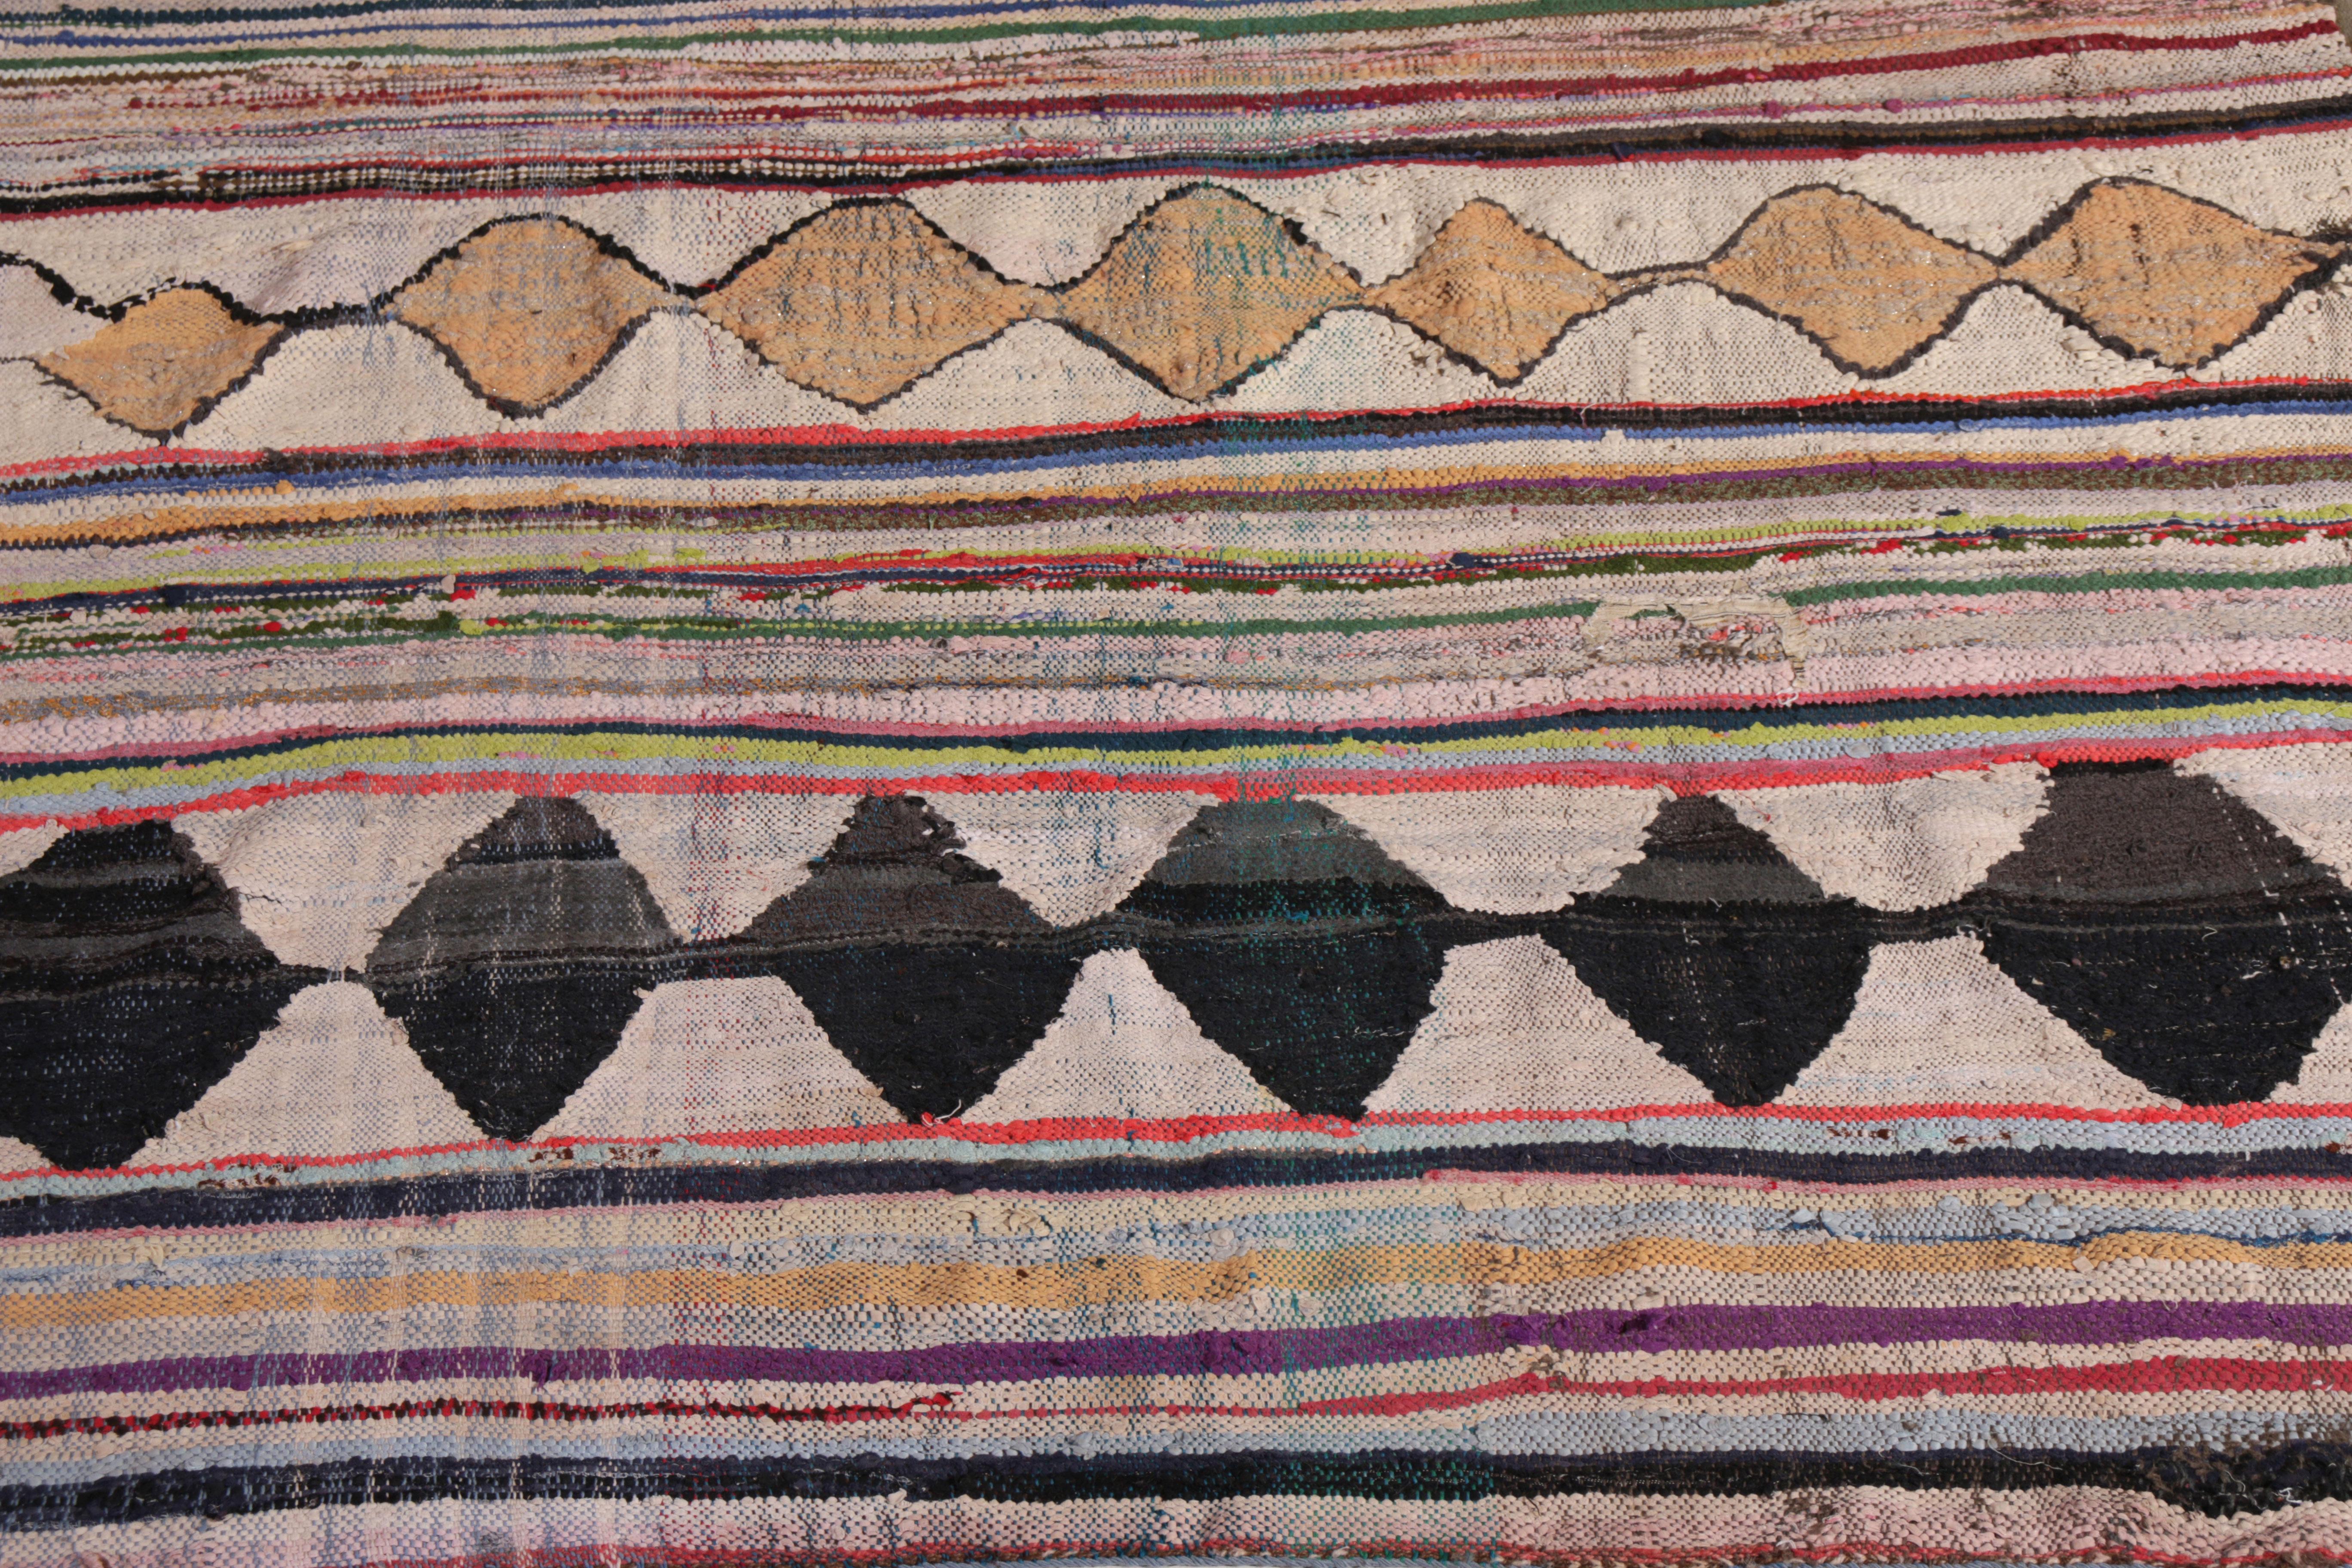 Hand-Woven 1950s Midcentury Moroccan Flat-Weave Beige Pink Striped Tribal by Rug & Kilim